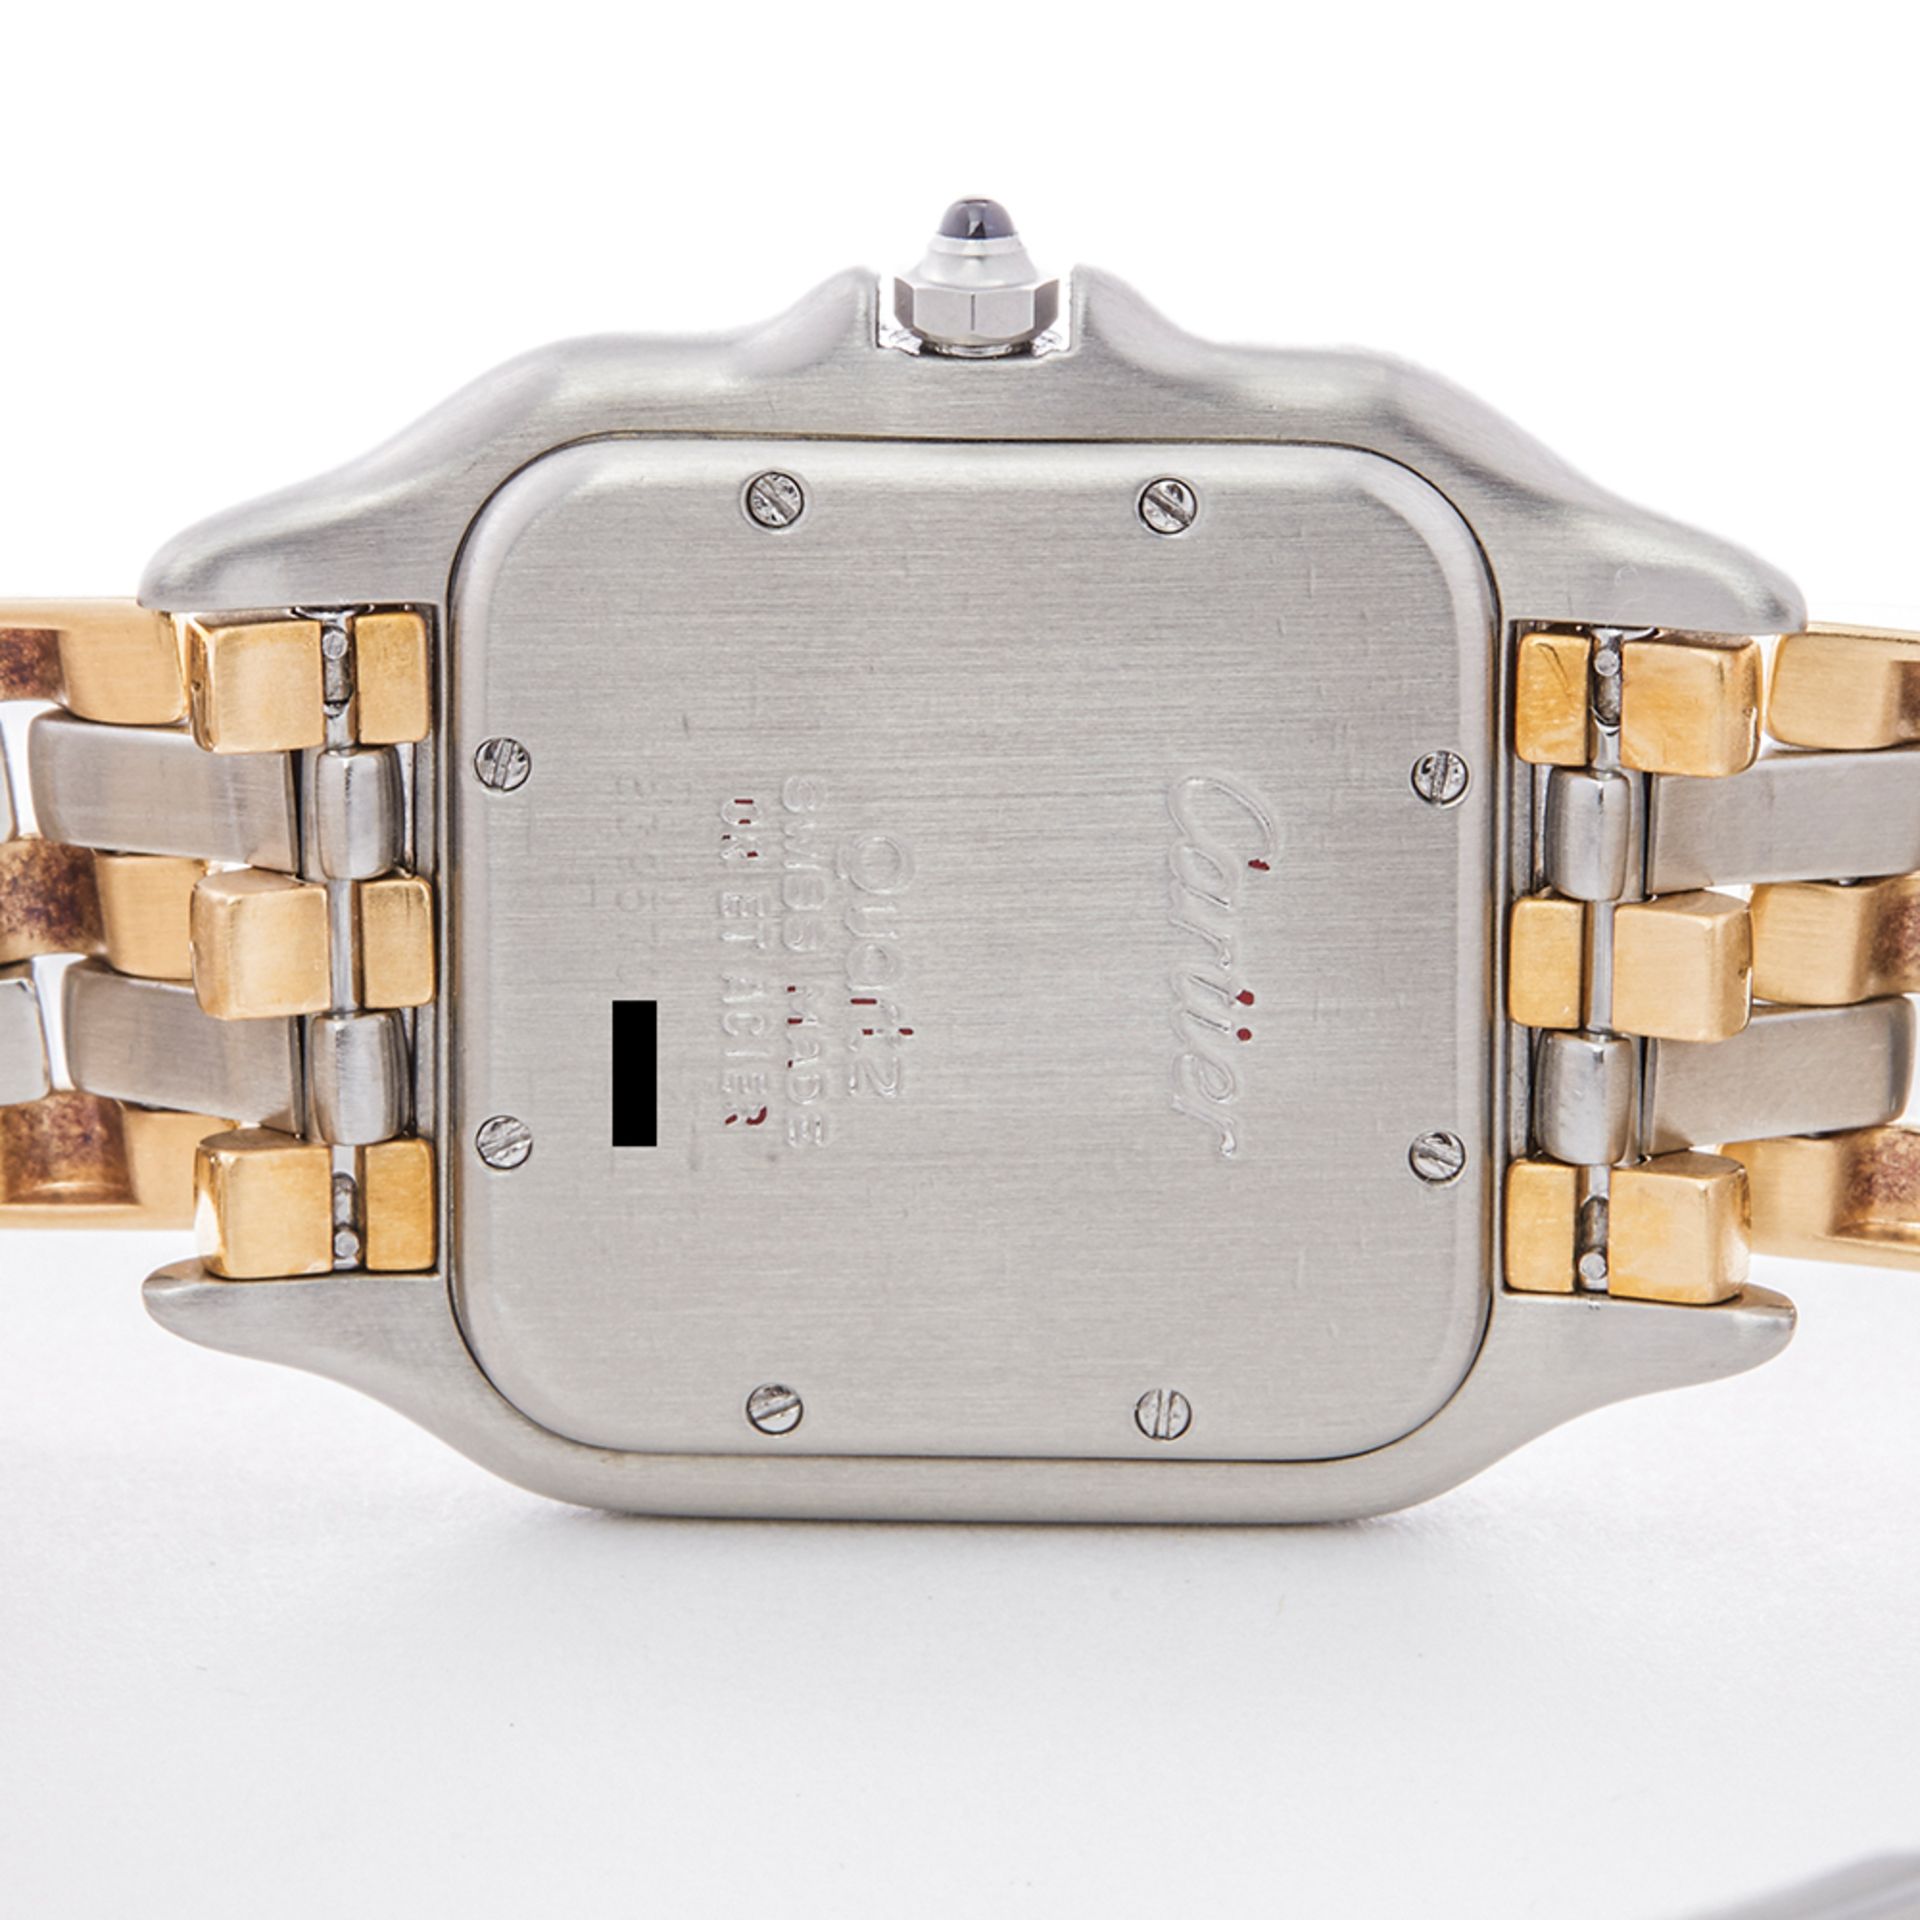 Cartier Panthere 3 Row Stainless Steel & 18k Yellow Gold - 83957 - Image 7 of 7